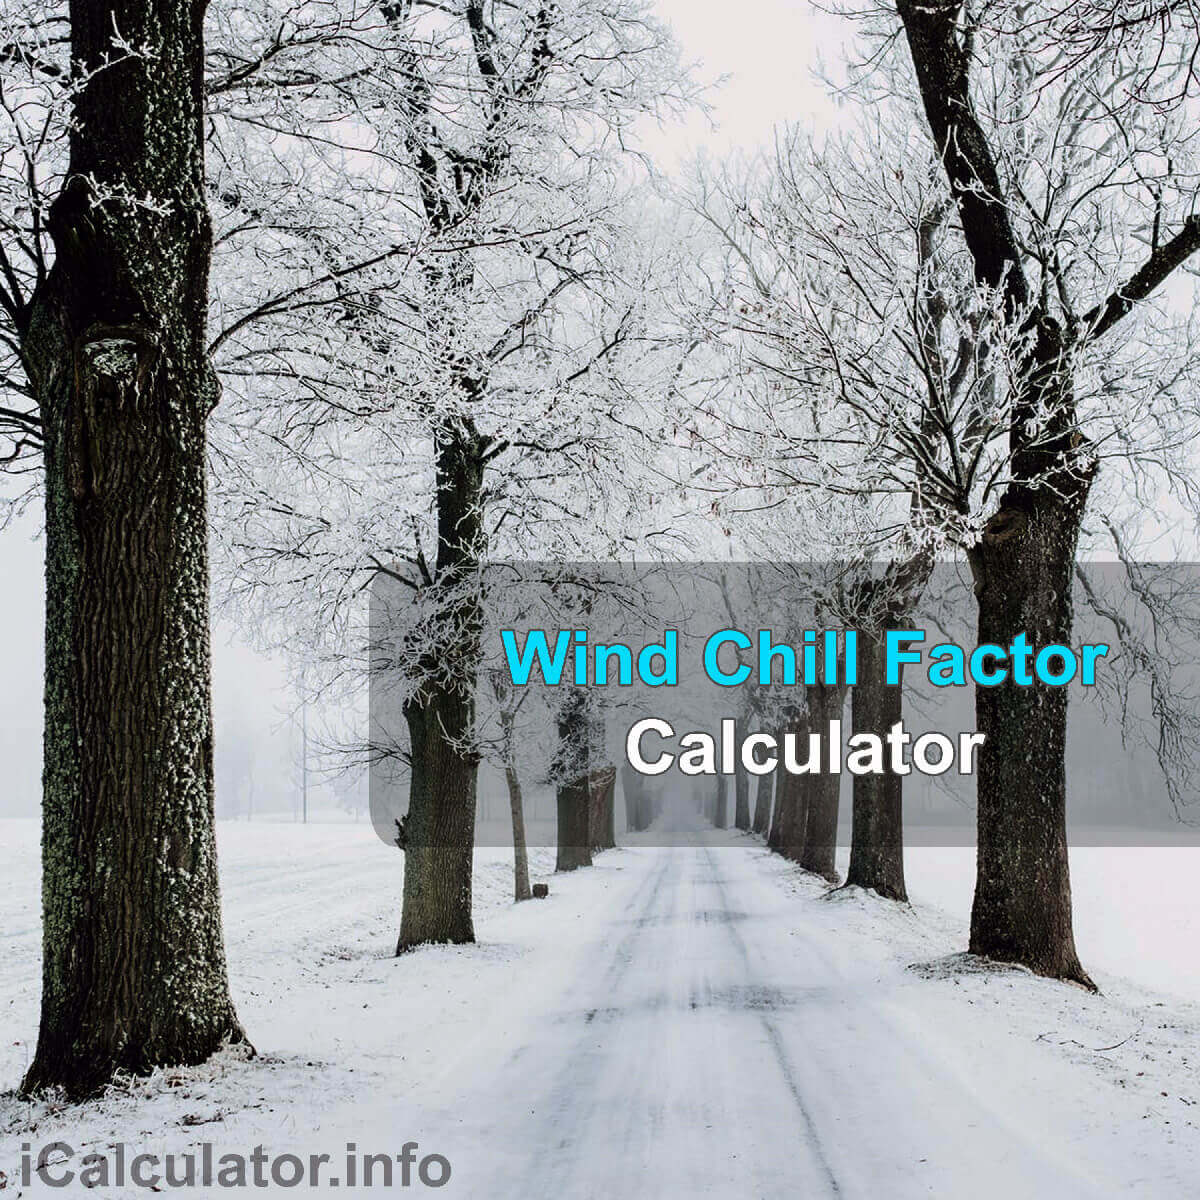 Wind Chill Factor Calculator. This image shows a cold and frosty winters day, a freezing day when the wind chill factor can significantly increase the risk of frostbite. The Wind Chill Factor calculator allows you to calculate the wind shill factor and reduce the risk of frostbite.